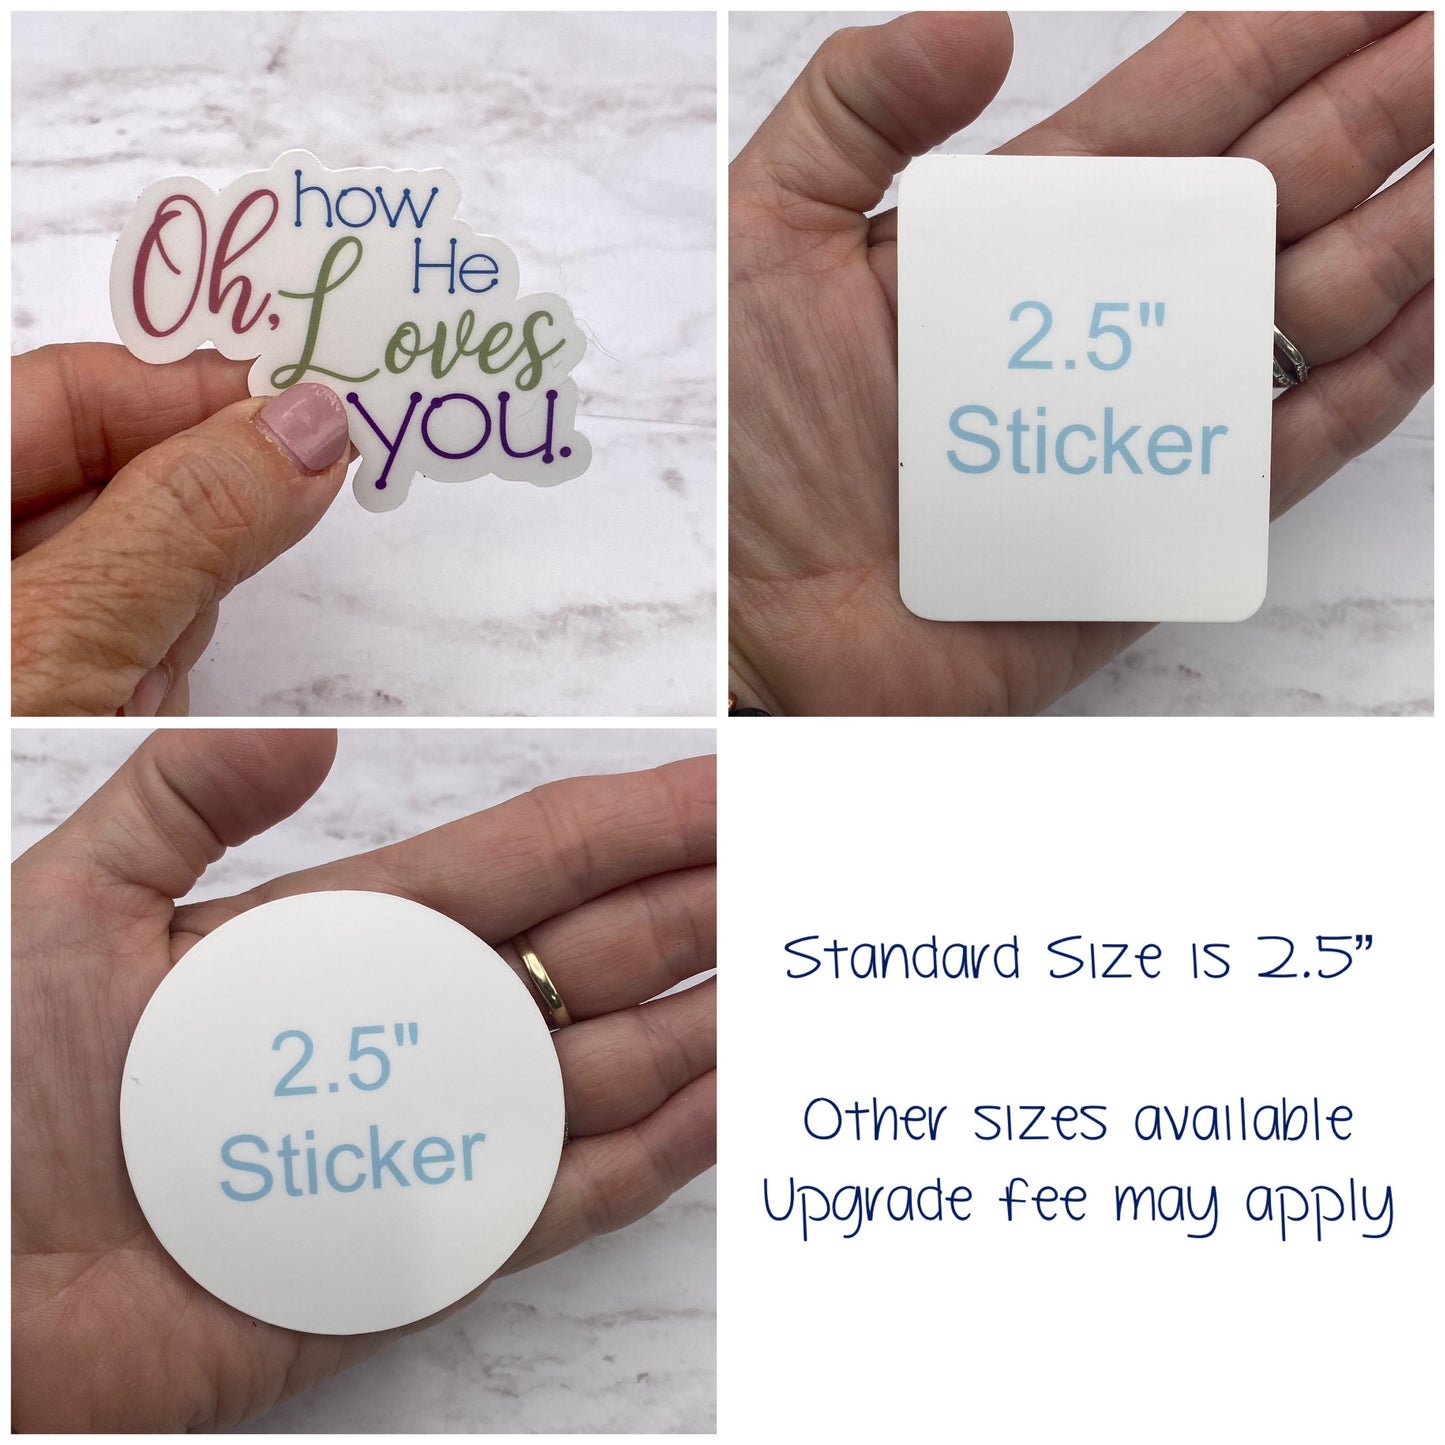 For I know the plans I have for you, Declares the Lord - Jeremiah 29:11 Sticker - 2.5" waterproof & UV Resistant - 1 sticker or bulk pack